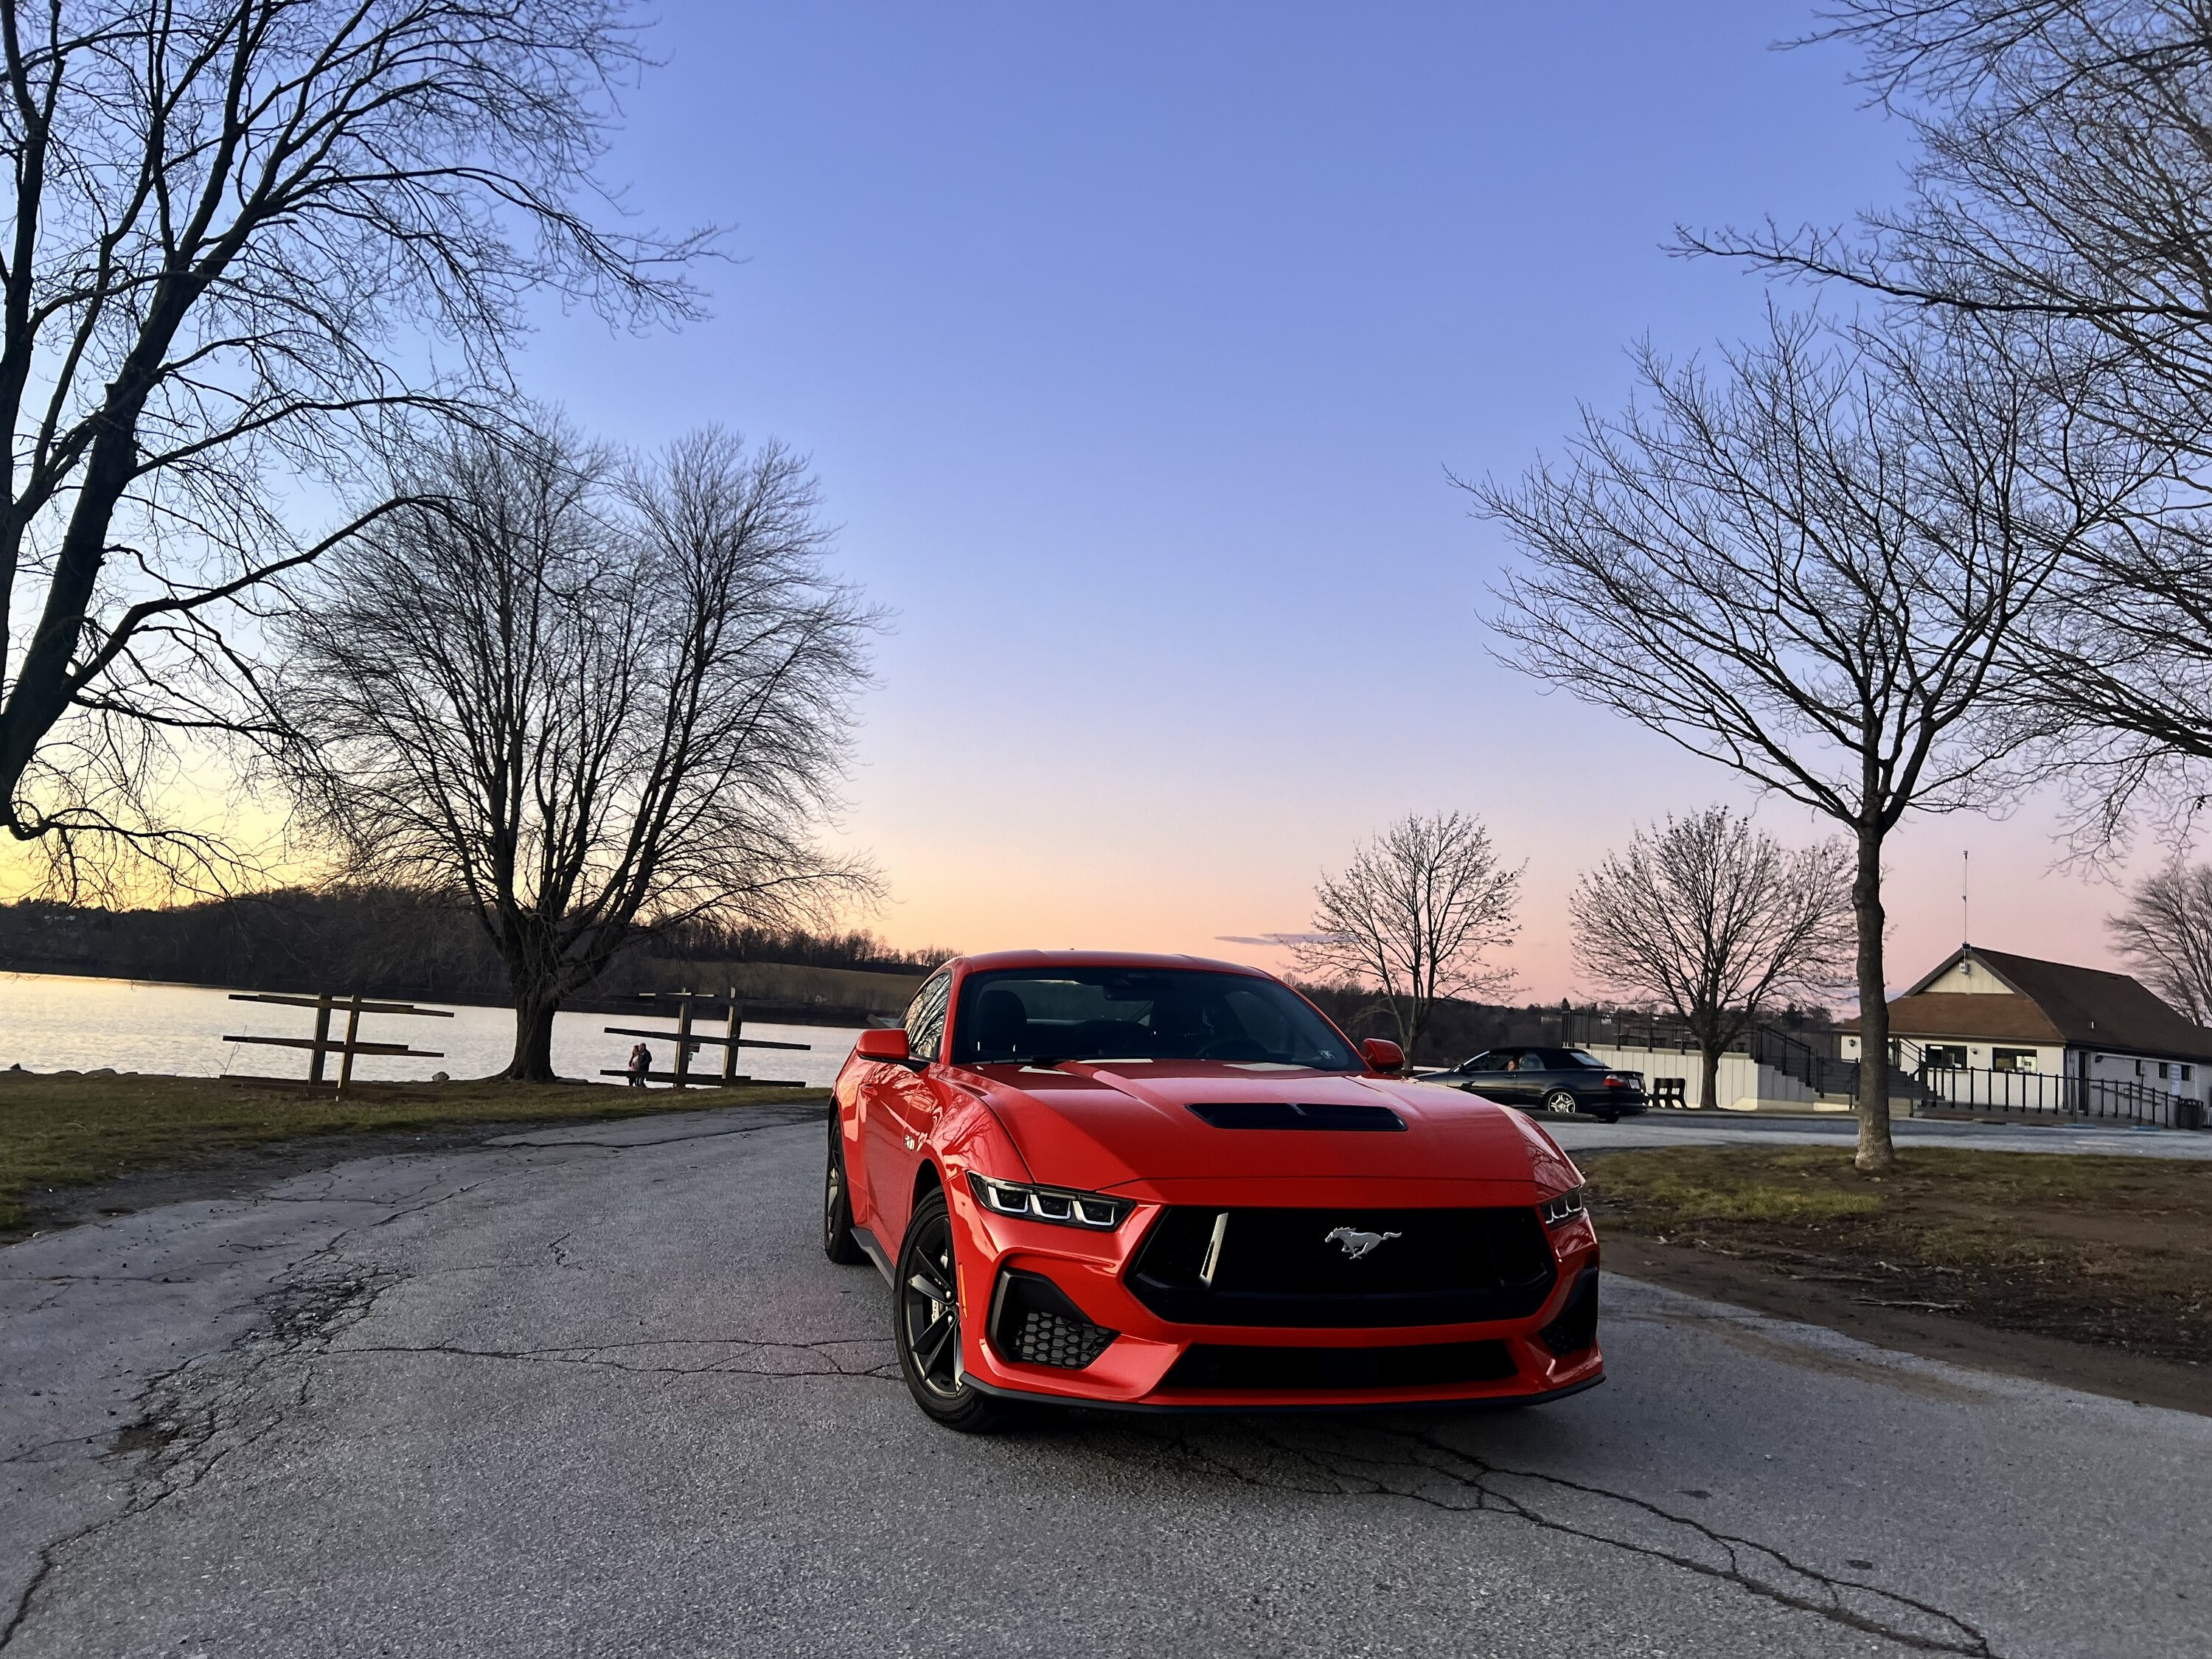 S650 Mustang Beautiful Race Red in the Sunset IMG_6205